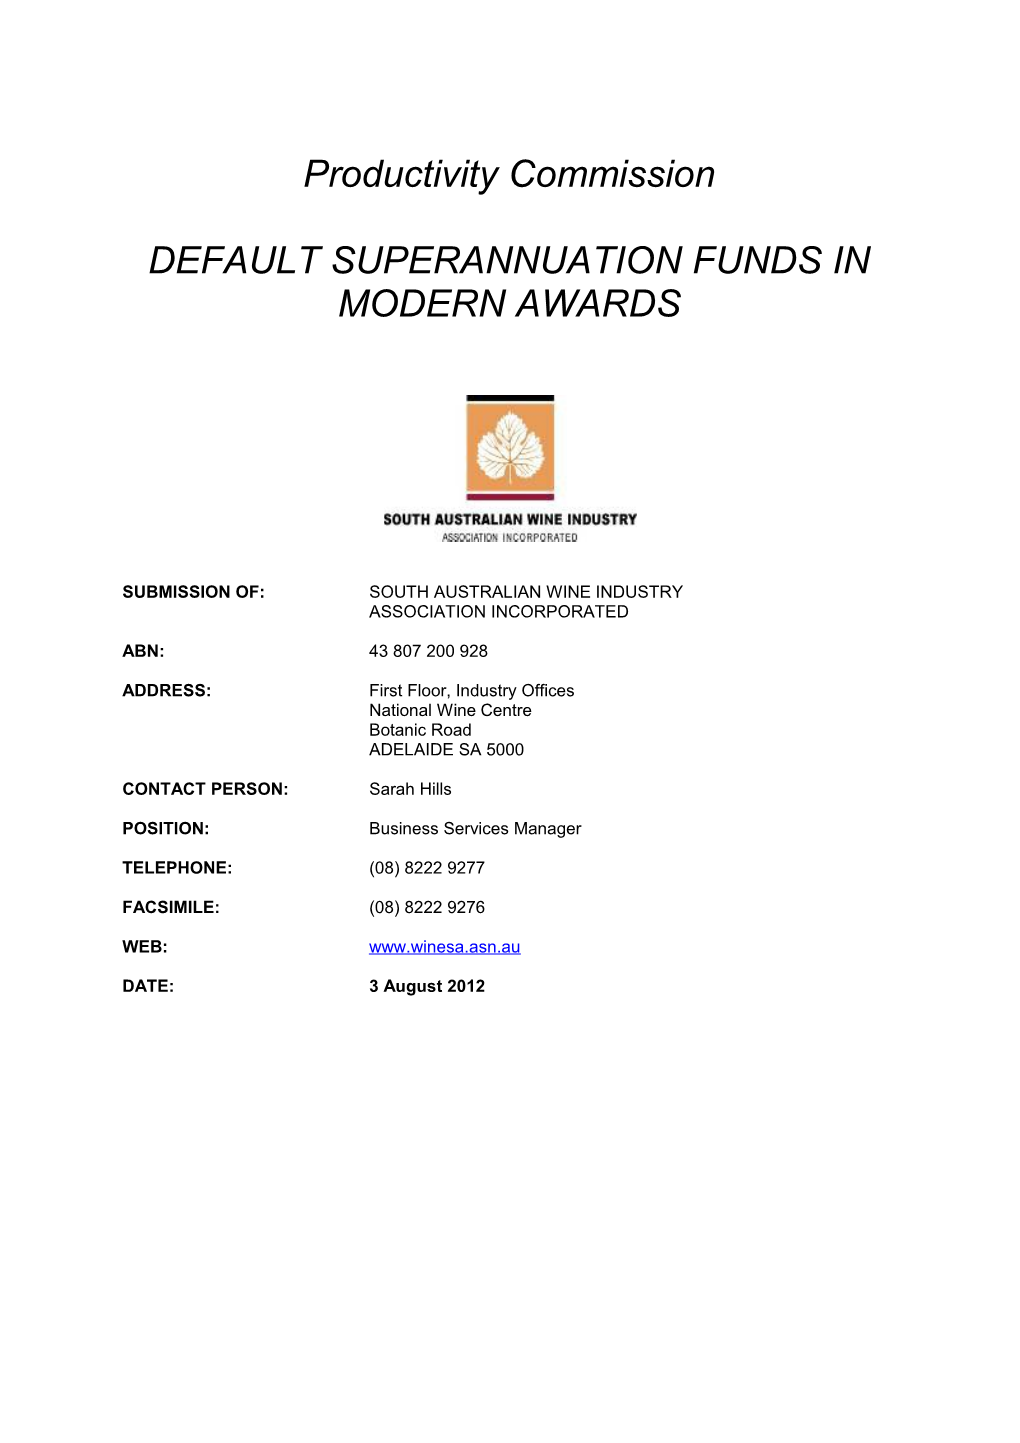 Submission DR71 - South Australian Wine Industry - Default Superannuation Funds in Modern